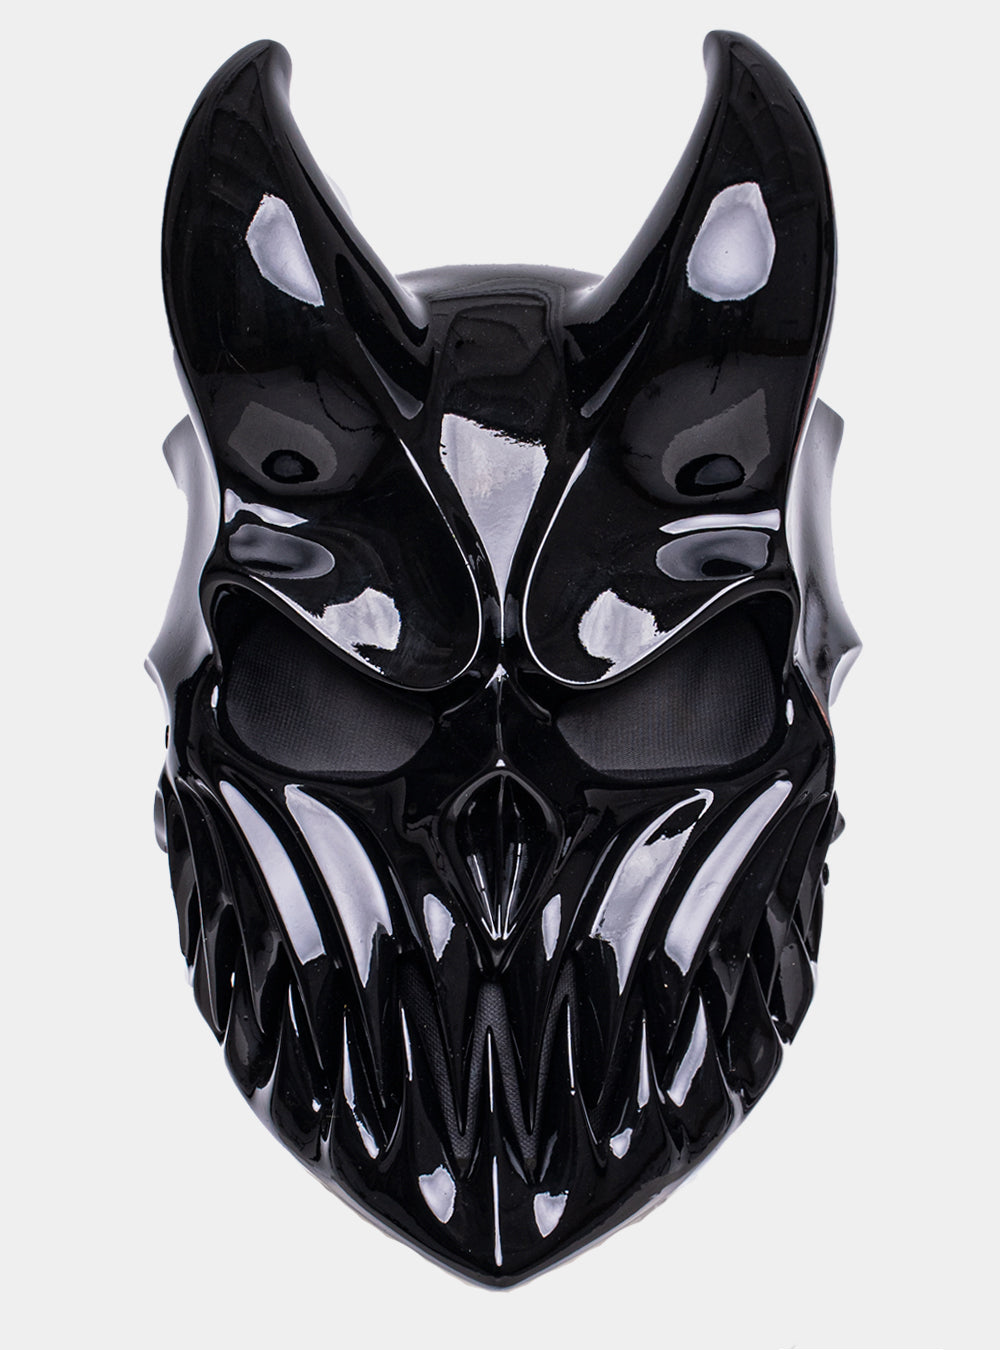 (SLAUGHTER TO PREVAIL) ALEX TERRIBLE MASK “KID OF DARKNESS” (BLACK)